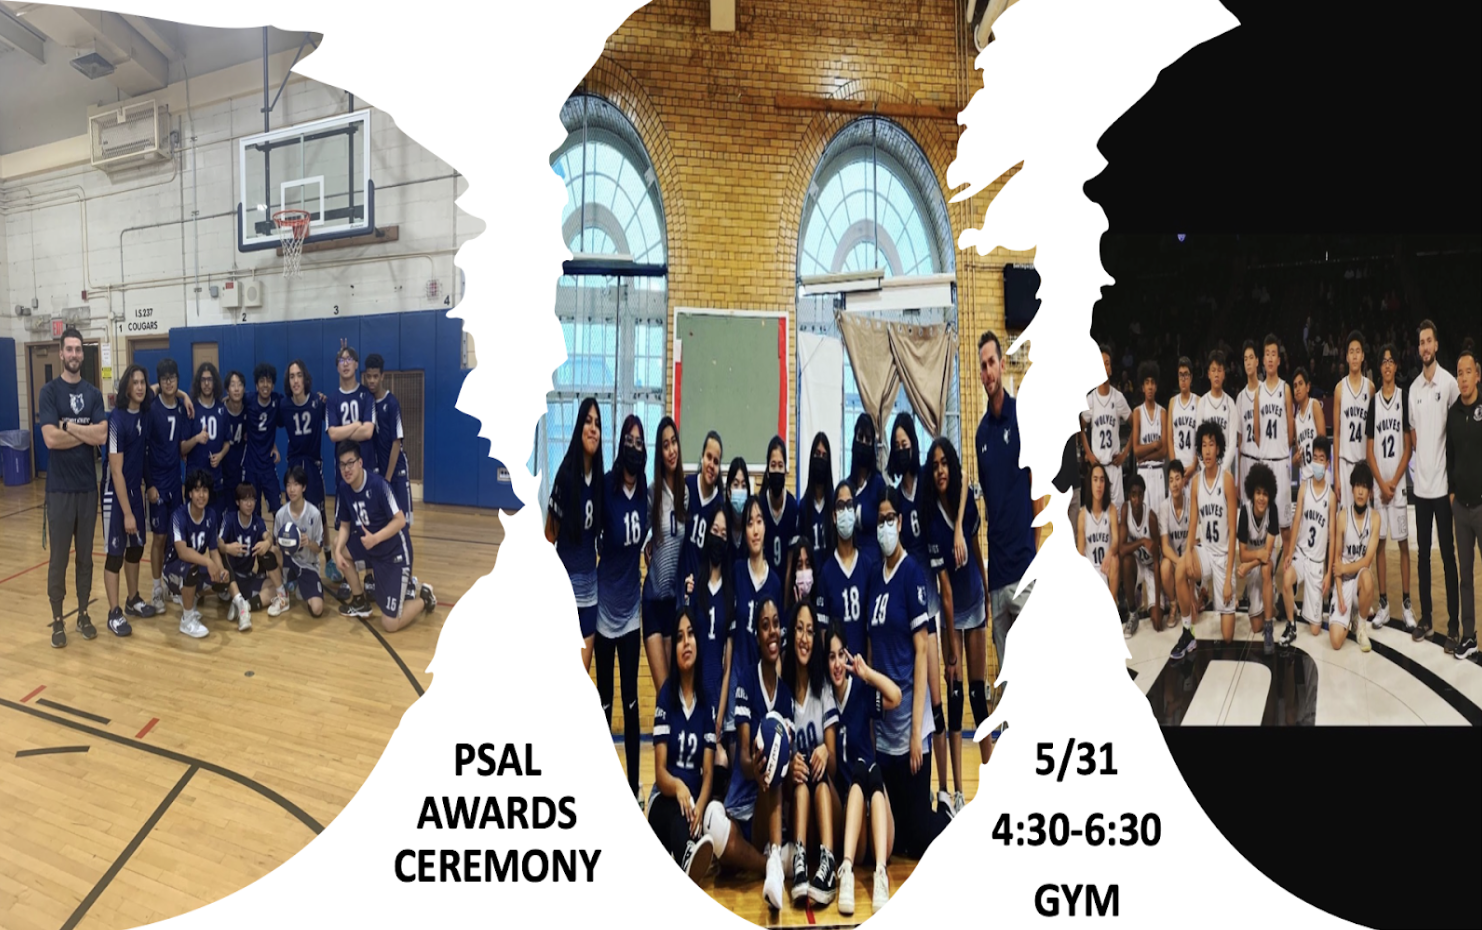 Team photos of East West basketball and volleyball